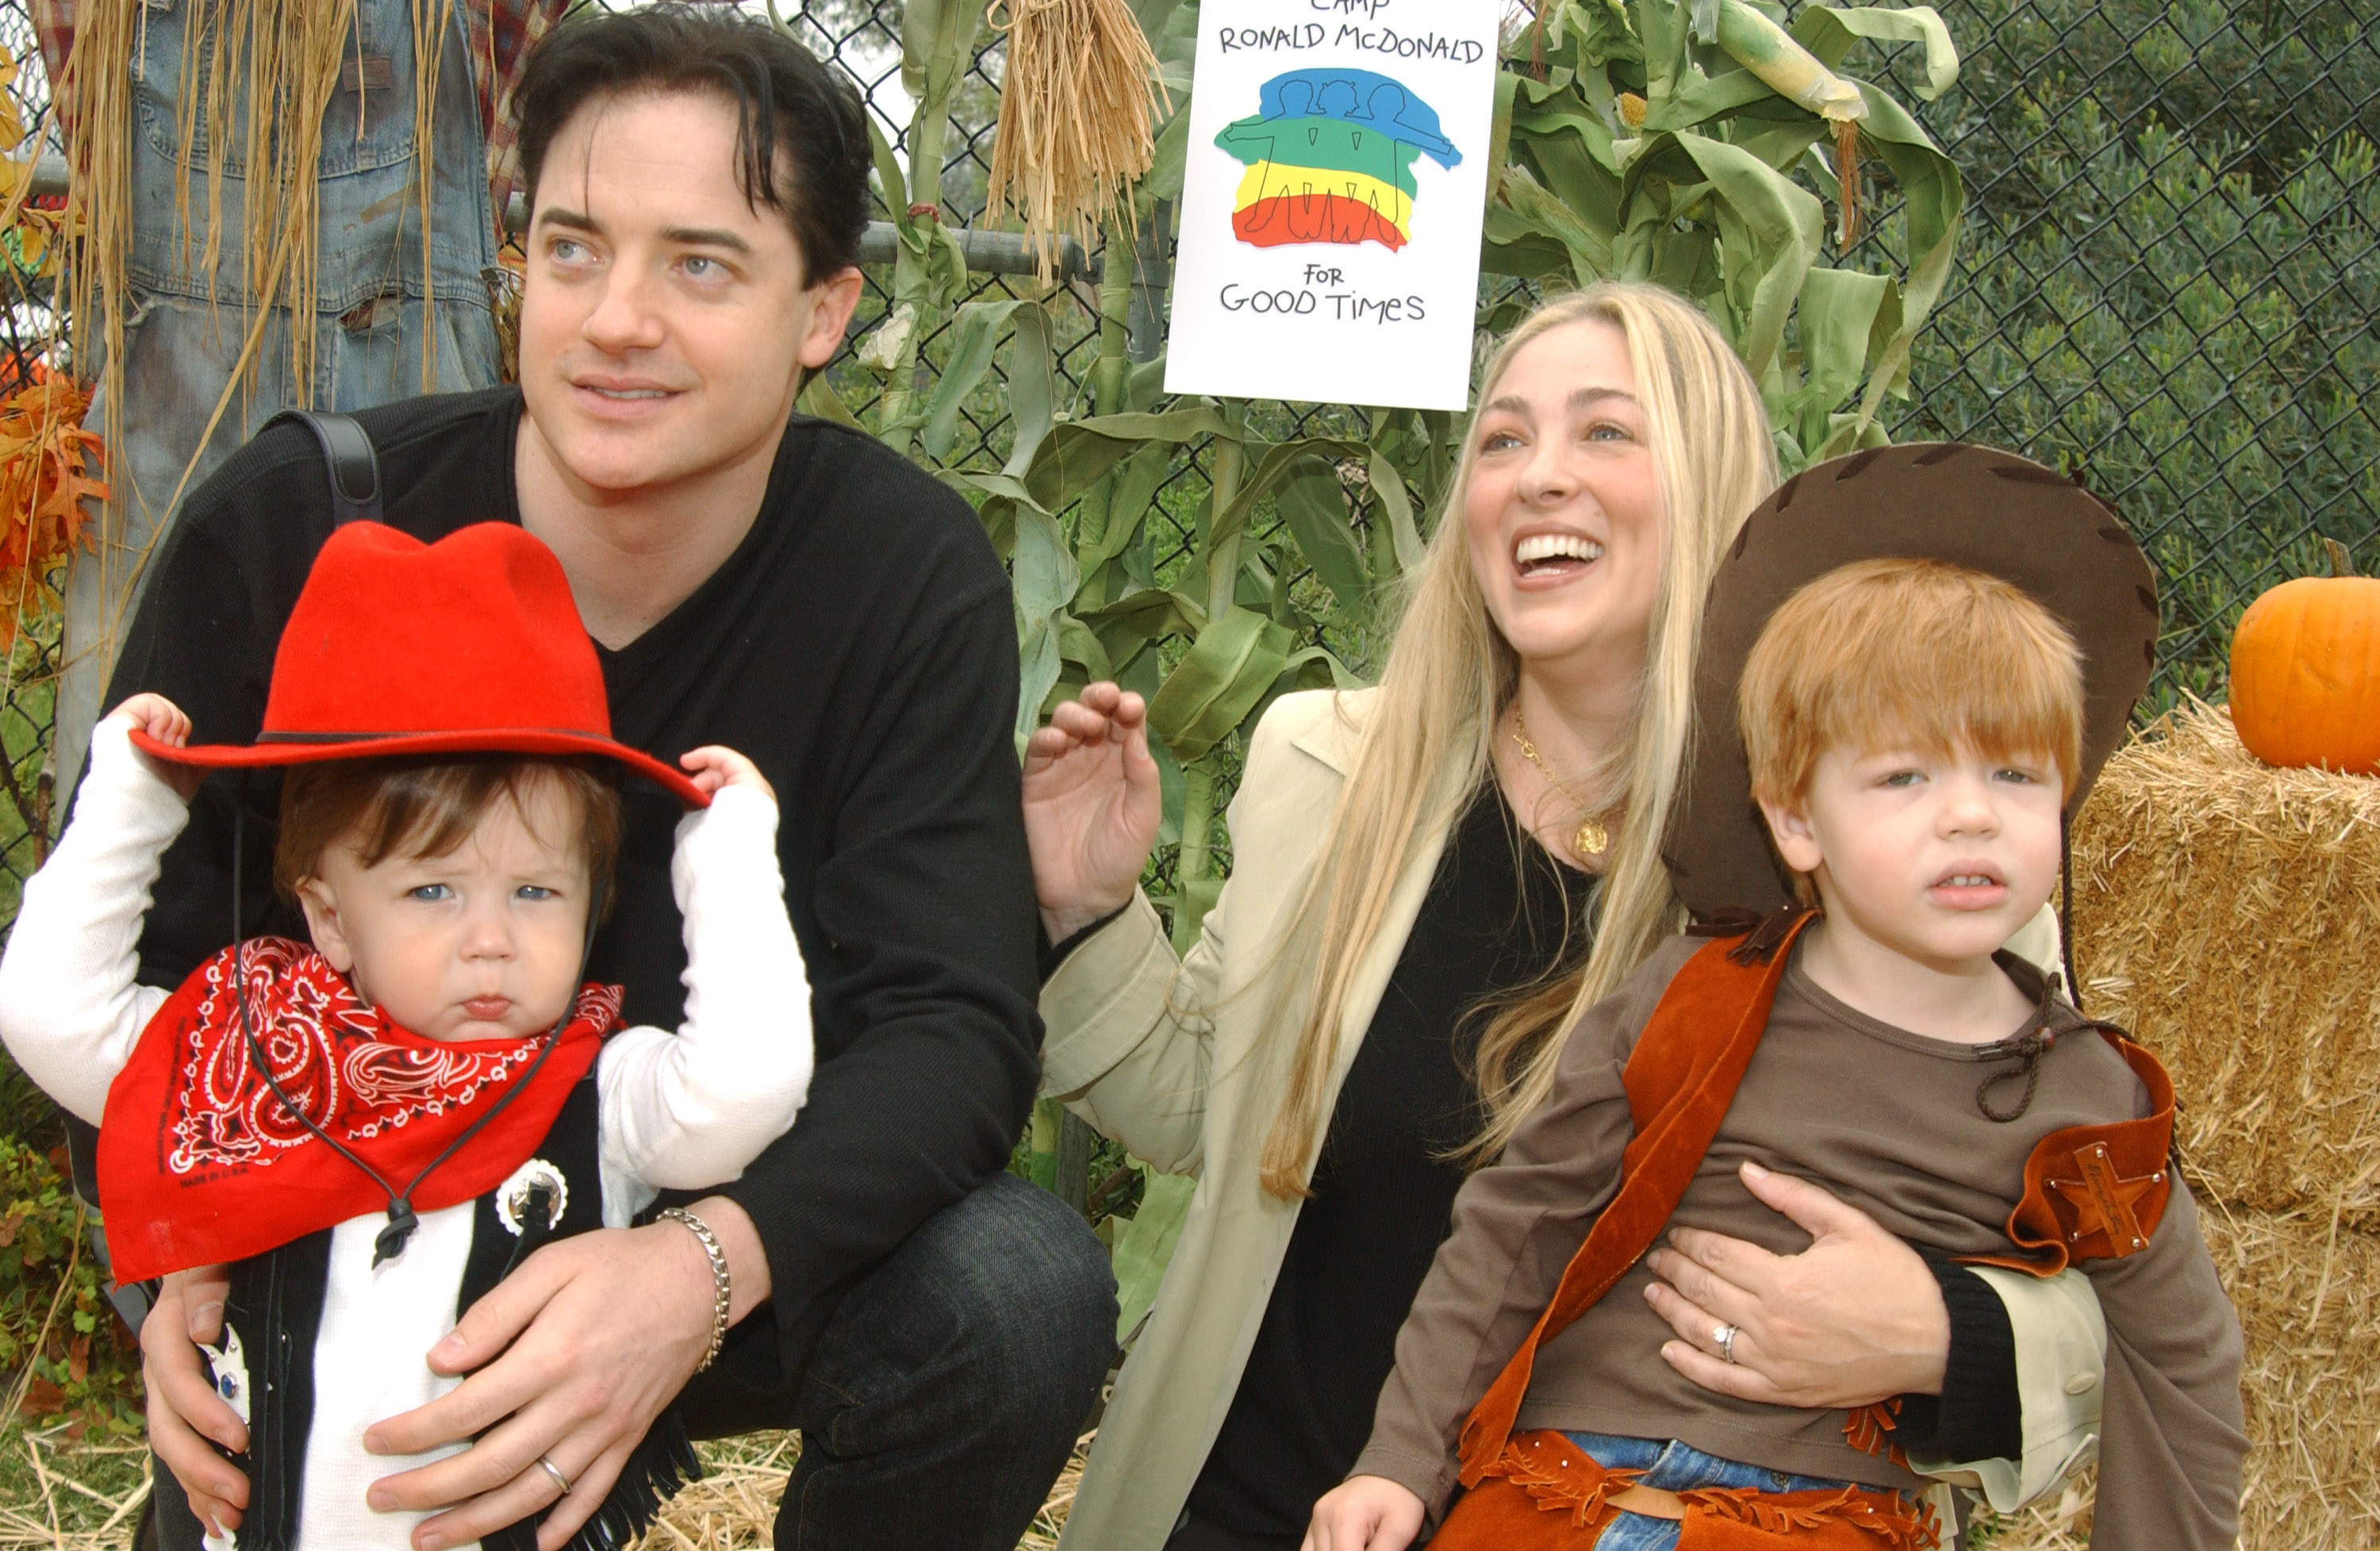 Brendan Fraser, Afton Smith, and their sons Holden and Griffin Fraser at Camp Ronald McDonald for Good Times 13th Annual Halloween Carnival on October 23, 2005 | Source: Getty Images